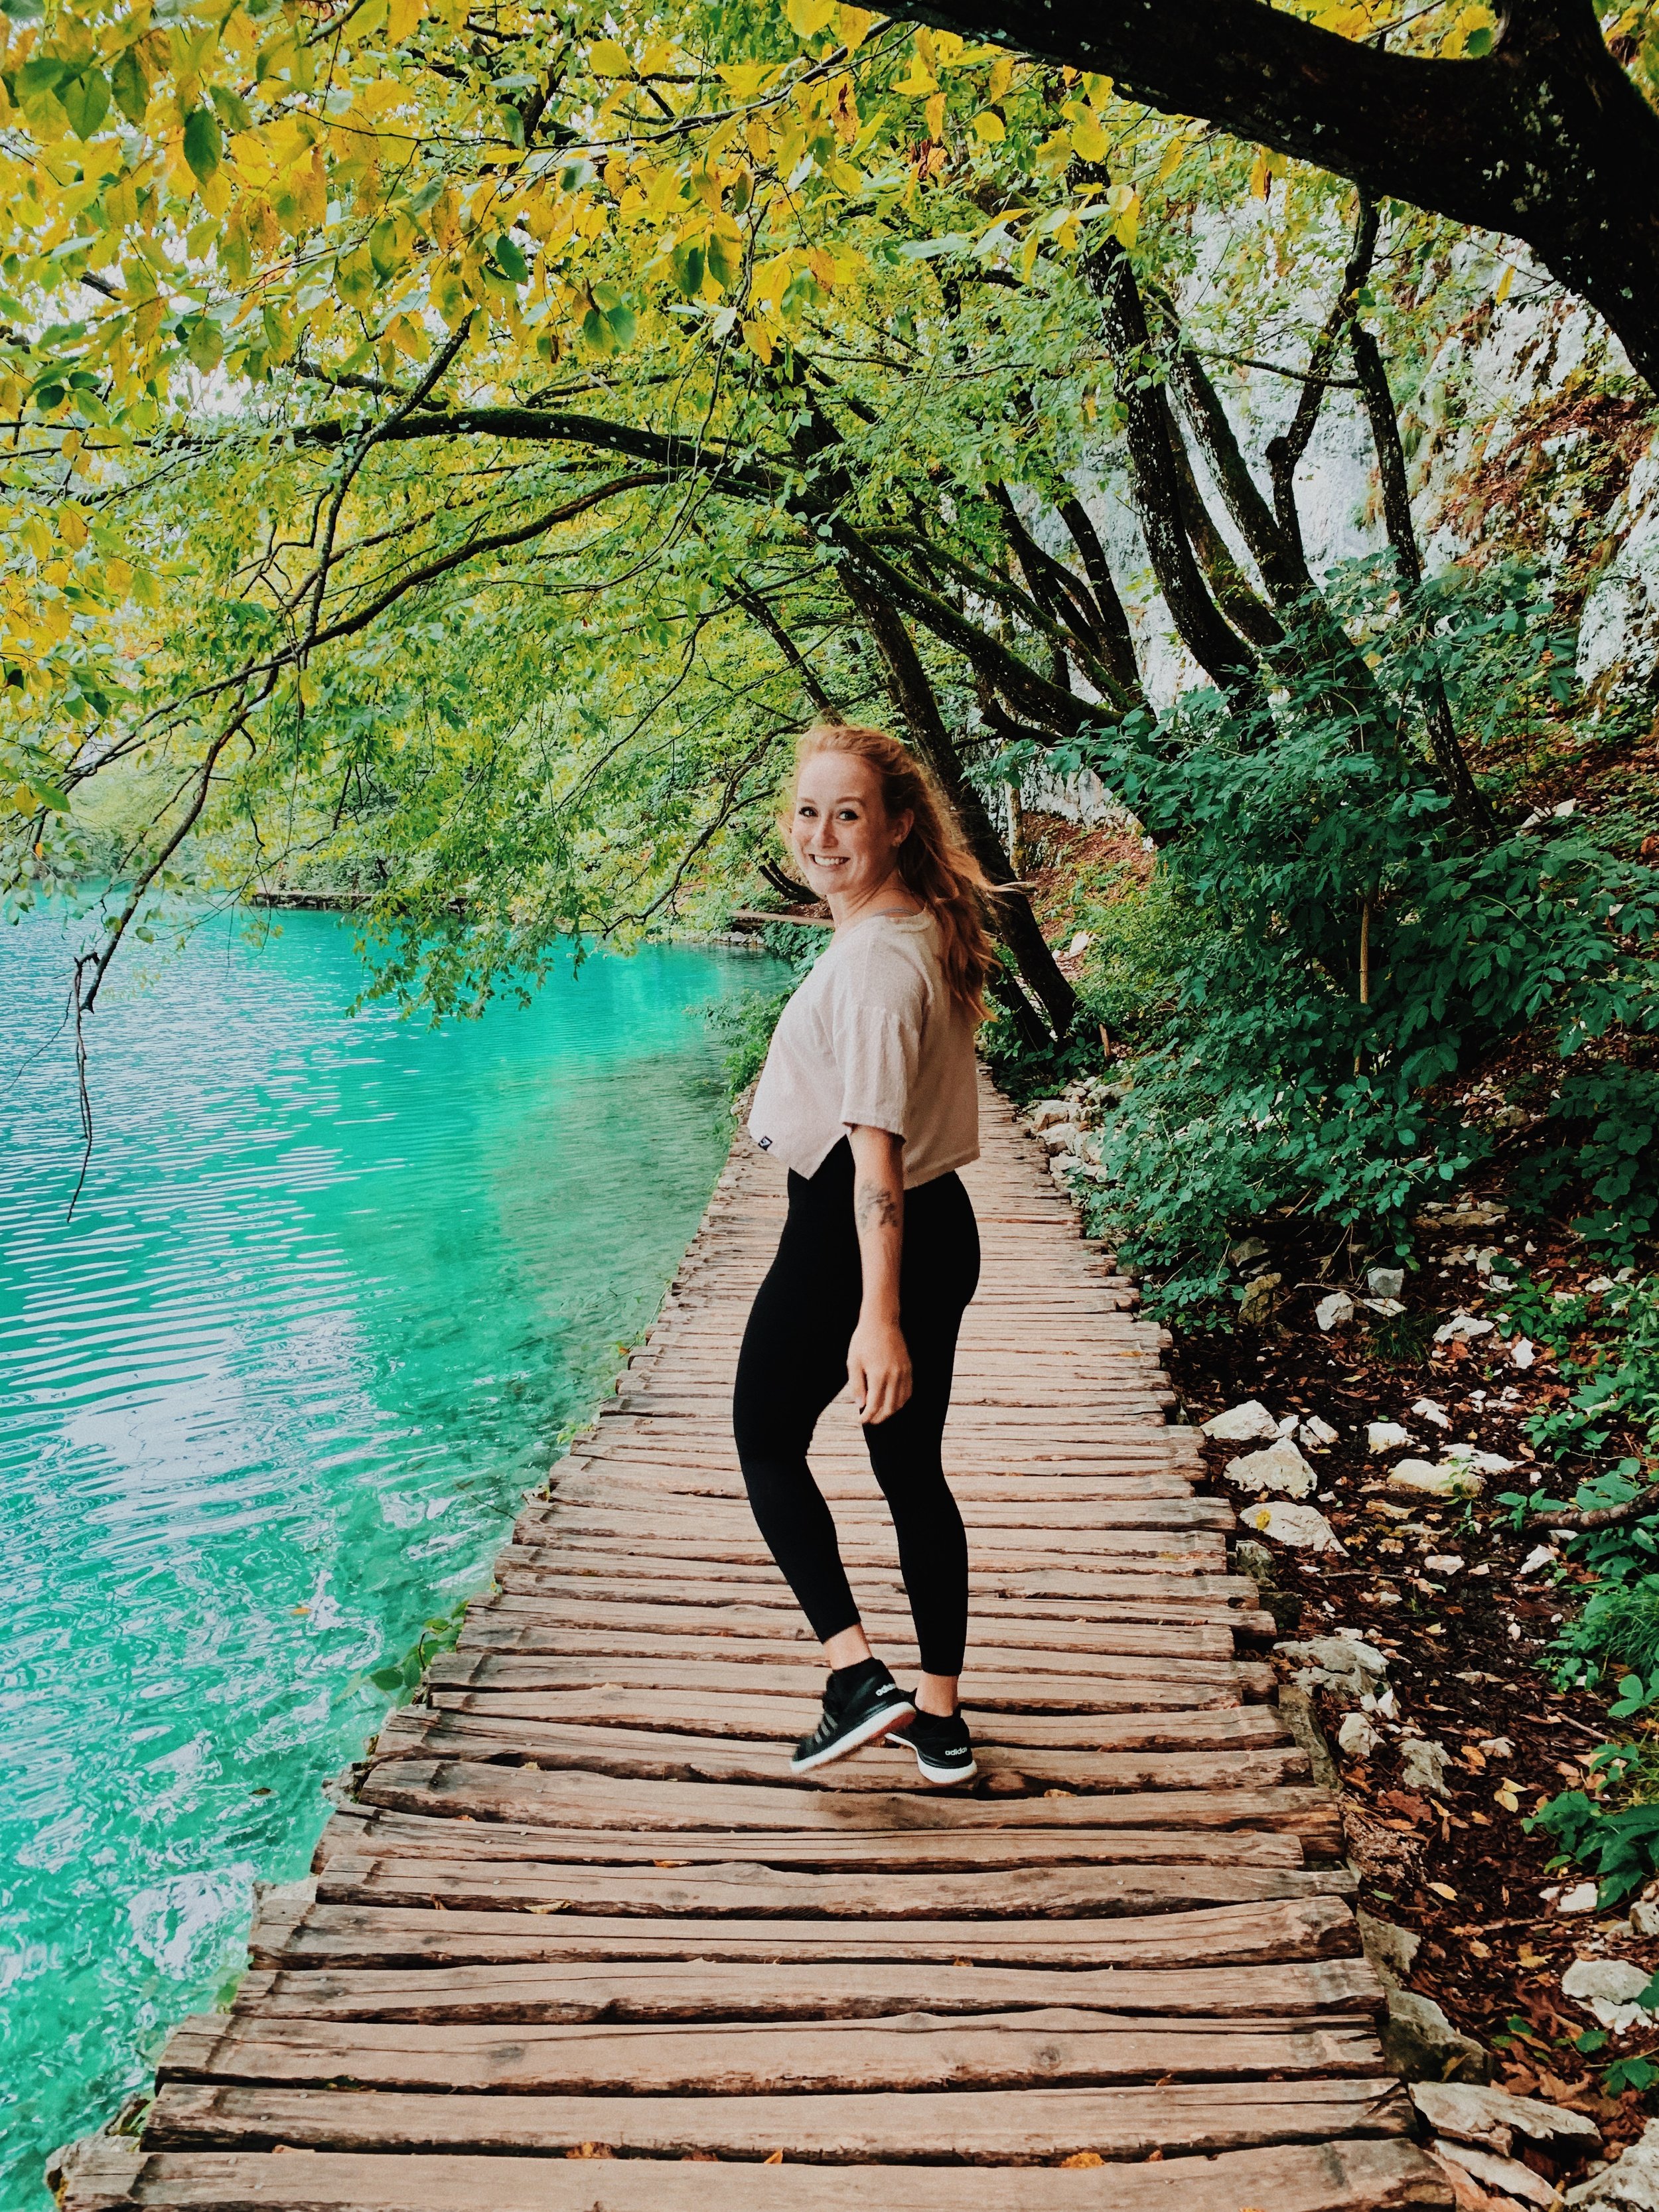 How to visit Plitvice Lakes